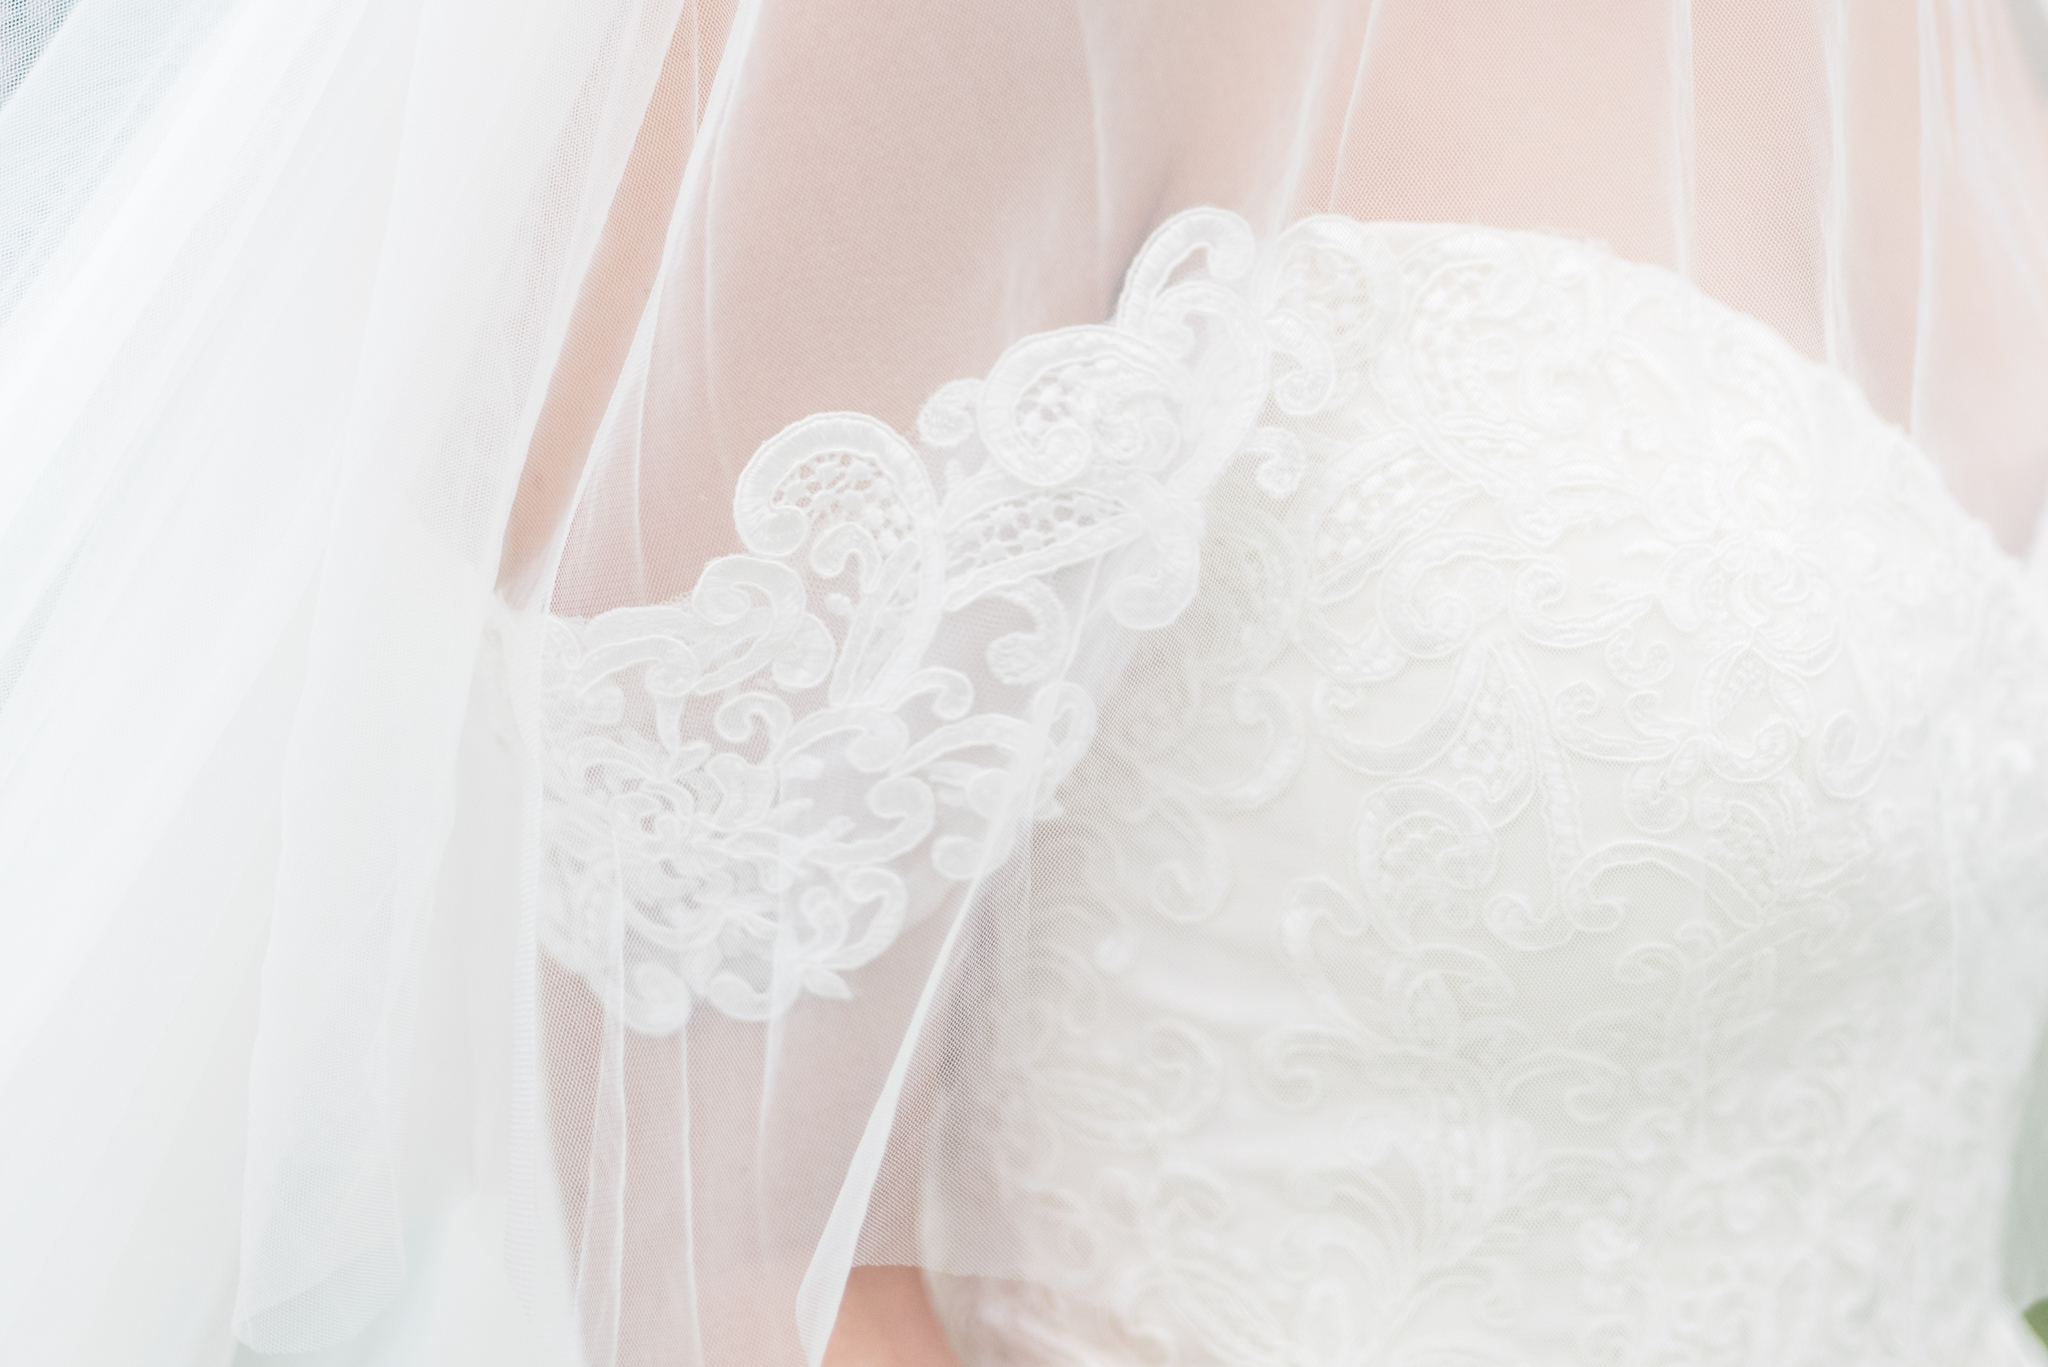 Lace on wedding gown sleeves.